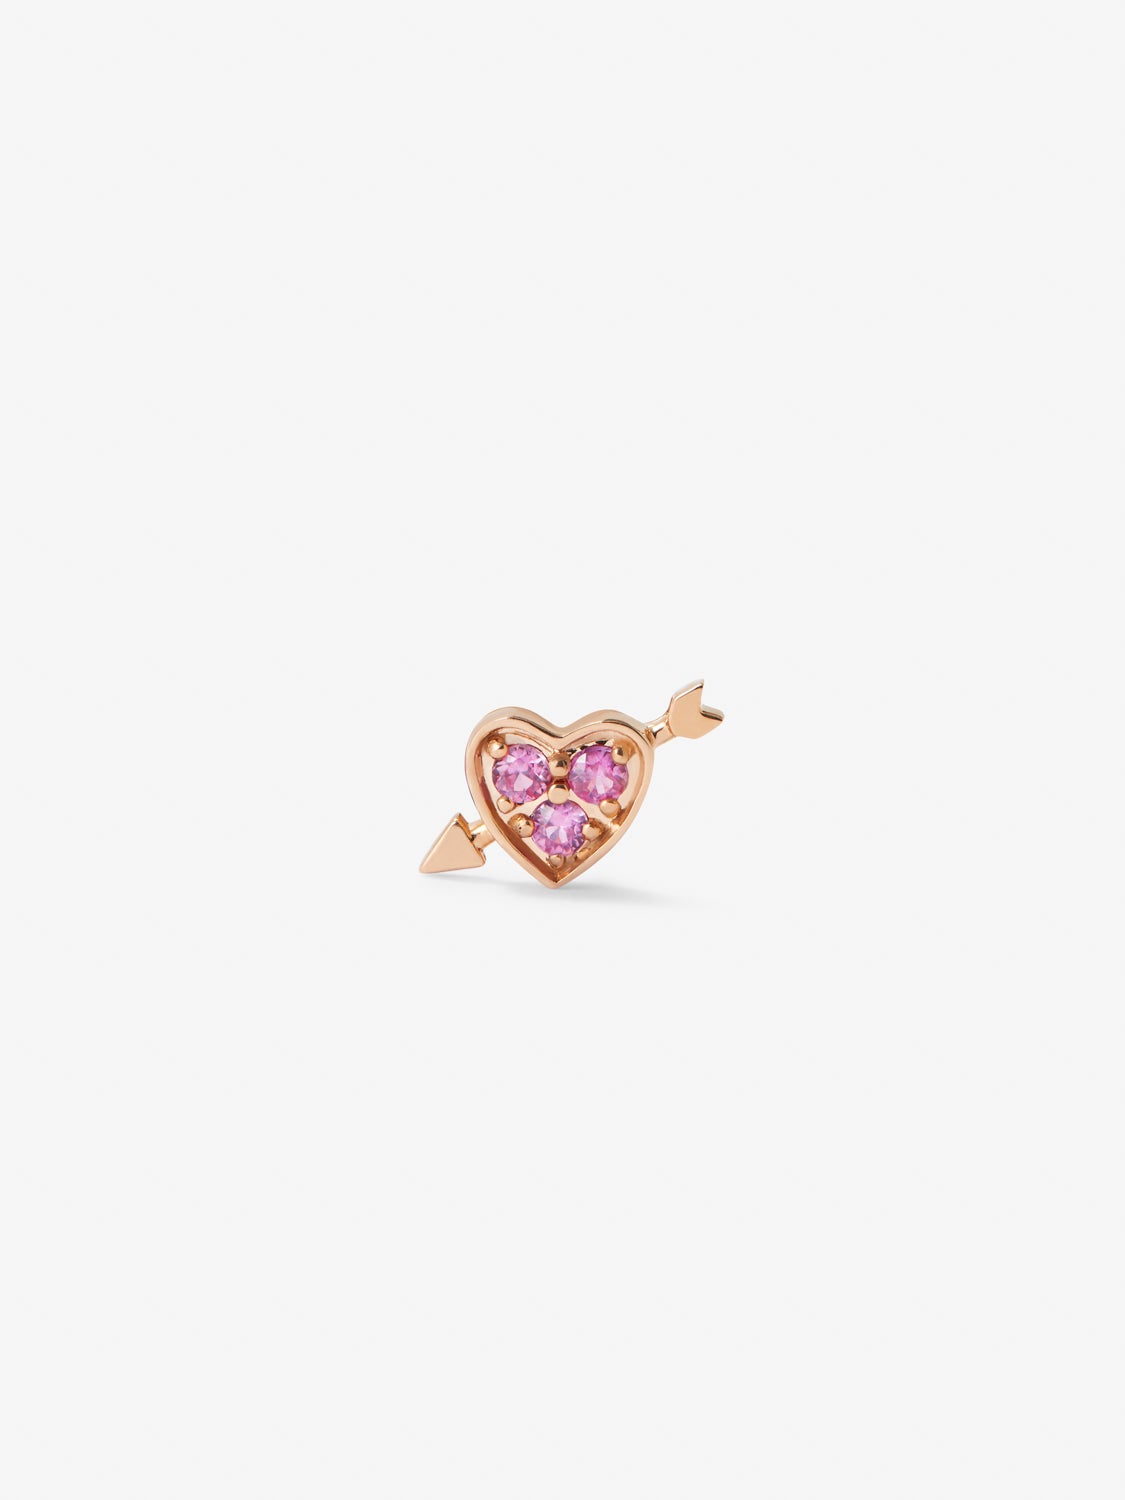 Individual 18K rose gold earring with 3 brilliant-cut pink sapphires with a total of 0.1 cts and heart shape